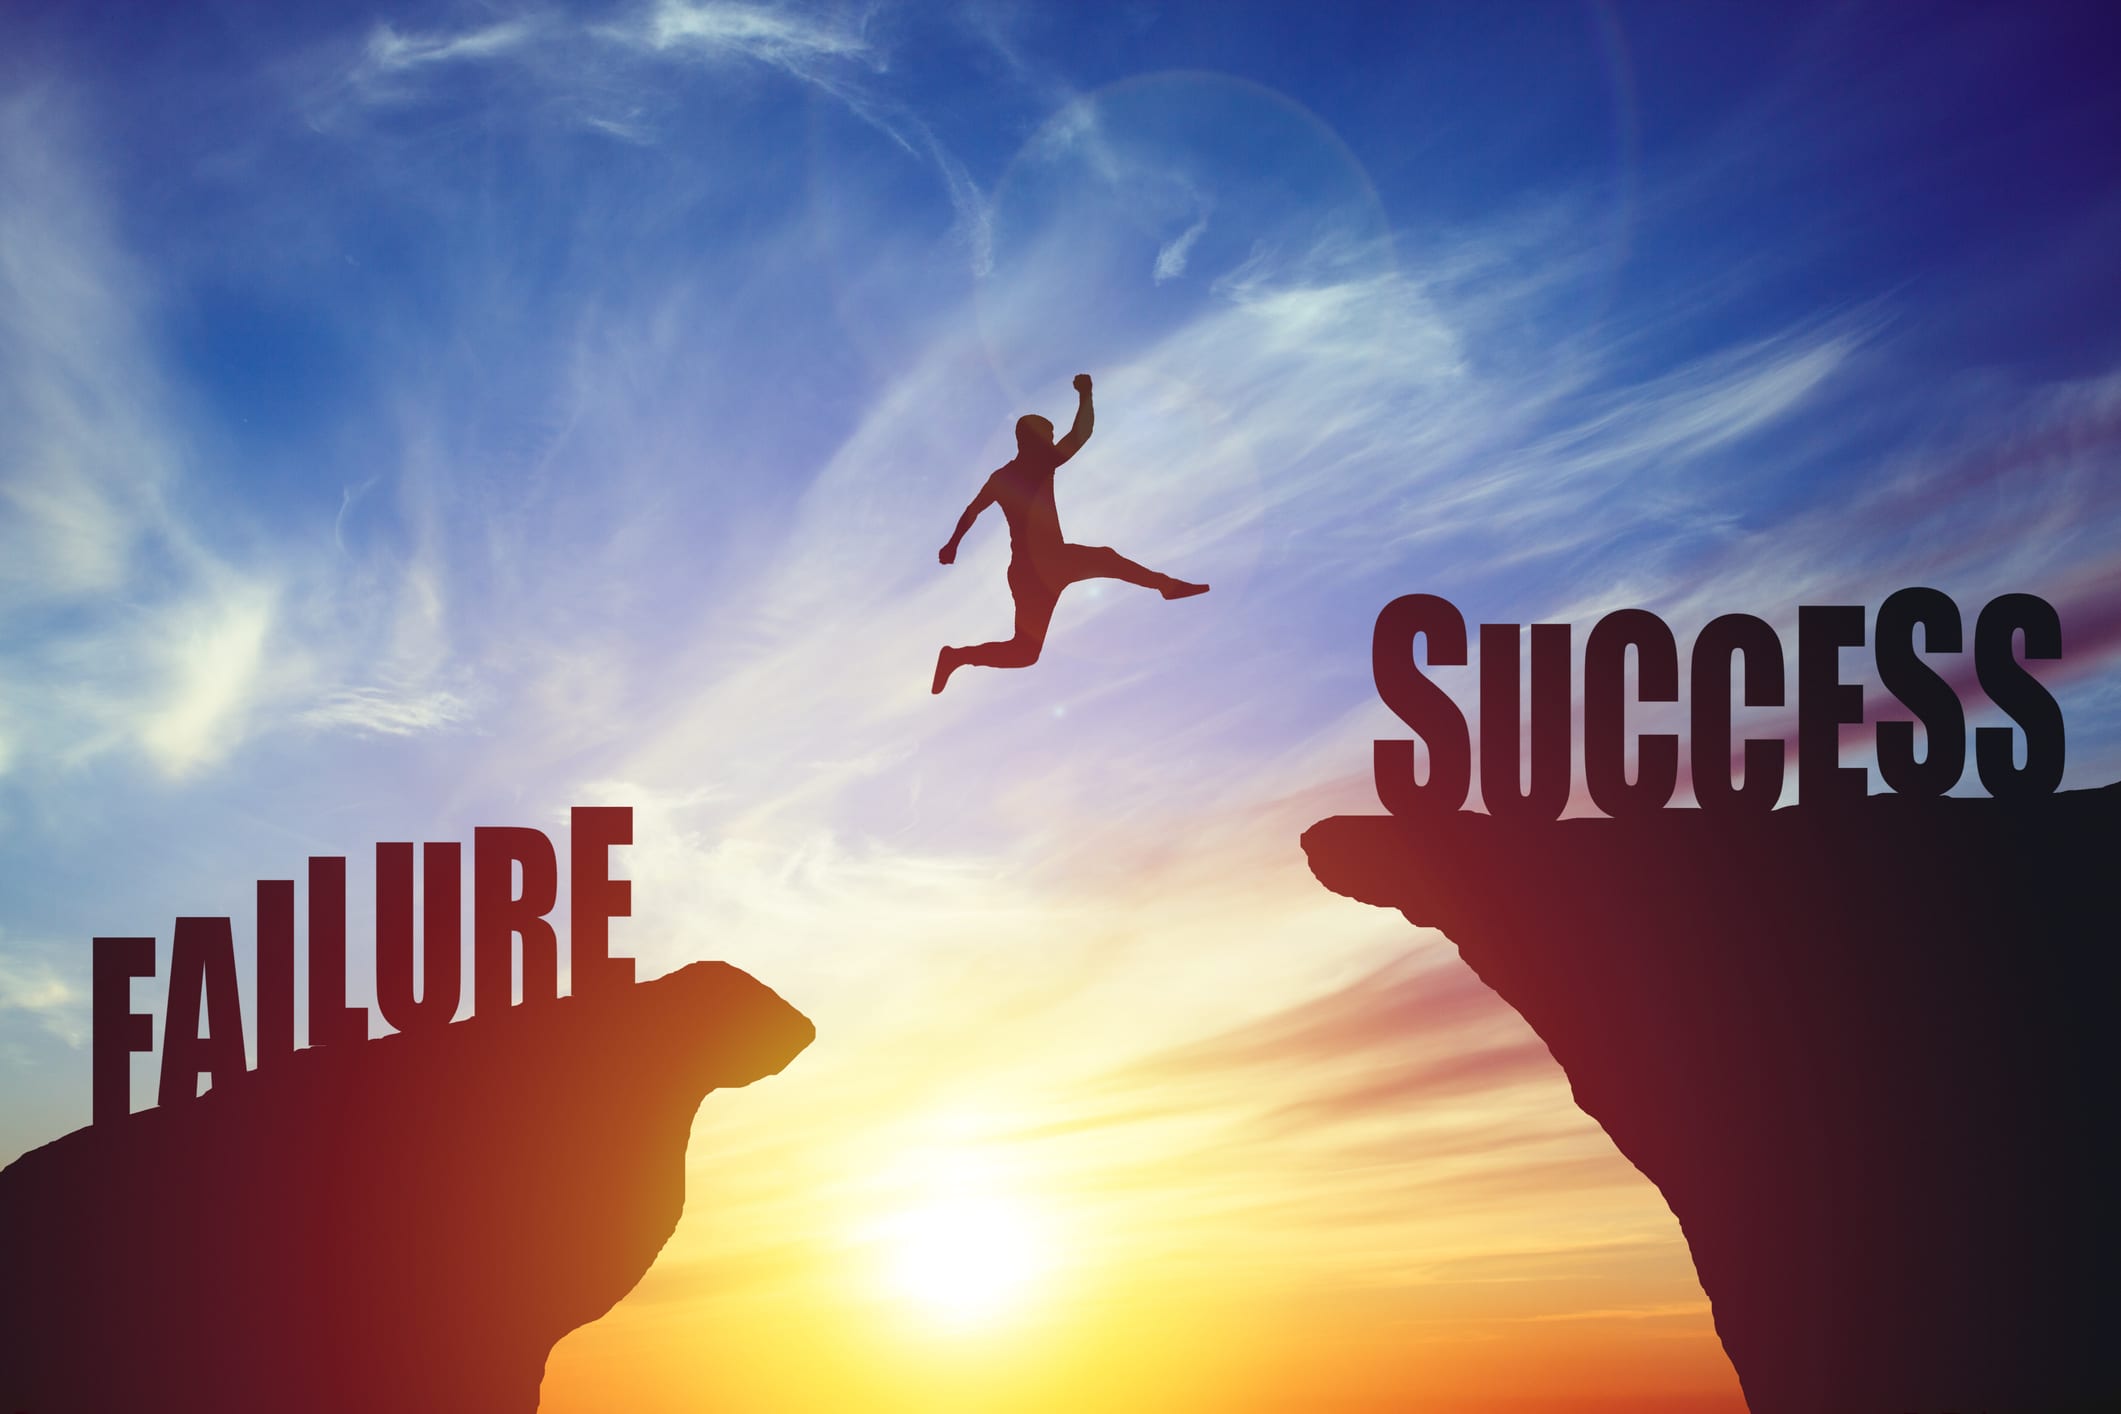 How to go from failure to success